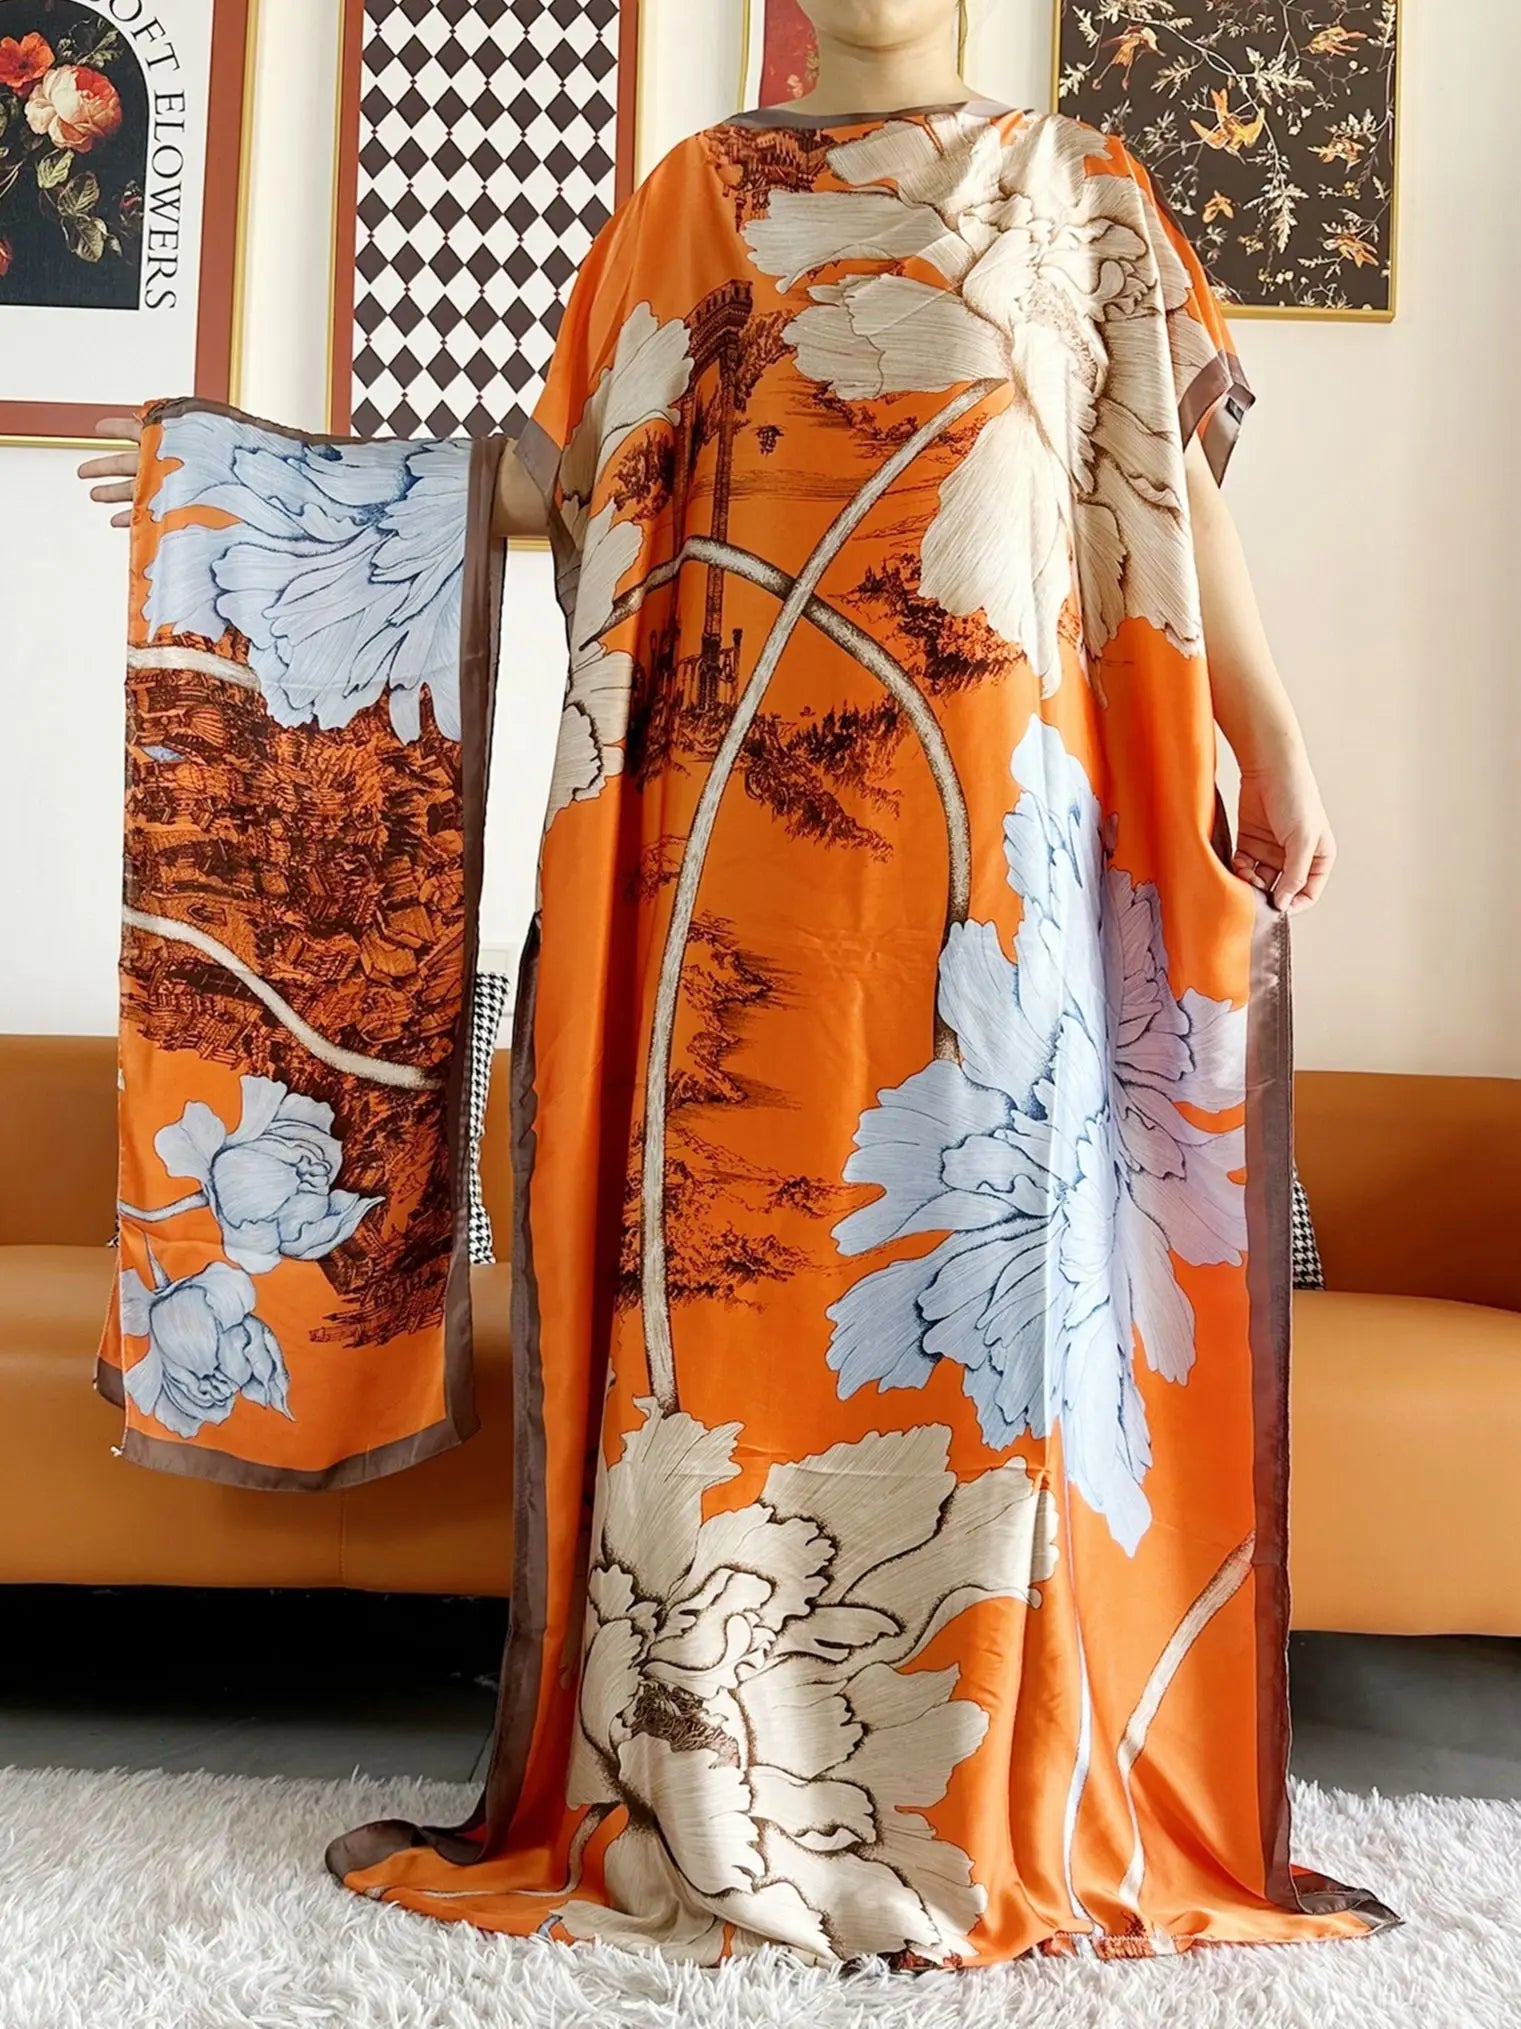 Elegant Printed Silk Abayas: Soft, Loose-Fit Robes with Matching Scarves for Modern Muslim Women's Summer Fashion - Flexi Africa - Flexi Africa offers Free Delivery Worldwide - Vibrant African traditional clothing showcasing bold prints and intricate designs